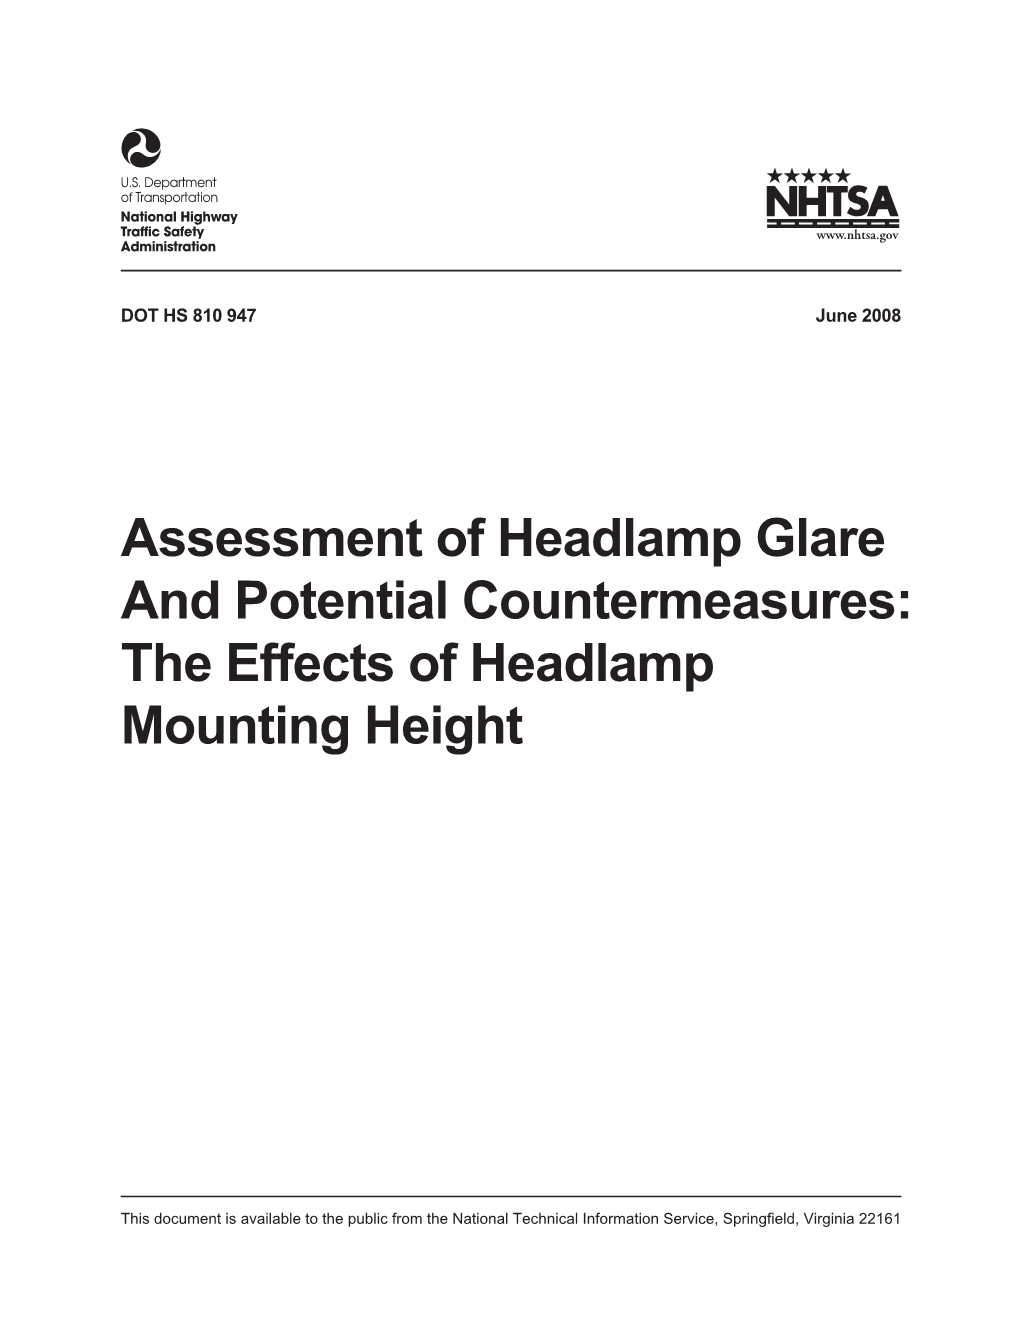 Assessment of Headlamp Glare and Potential Countermeasures: the Effects of Headlamp Mounting Height